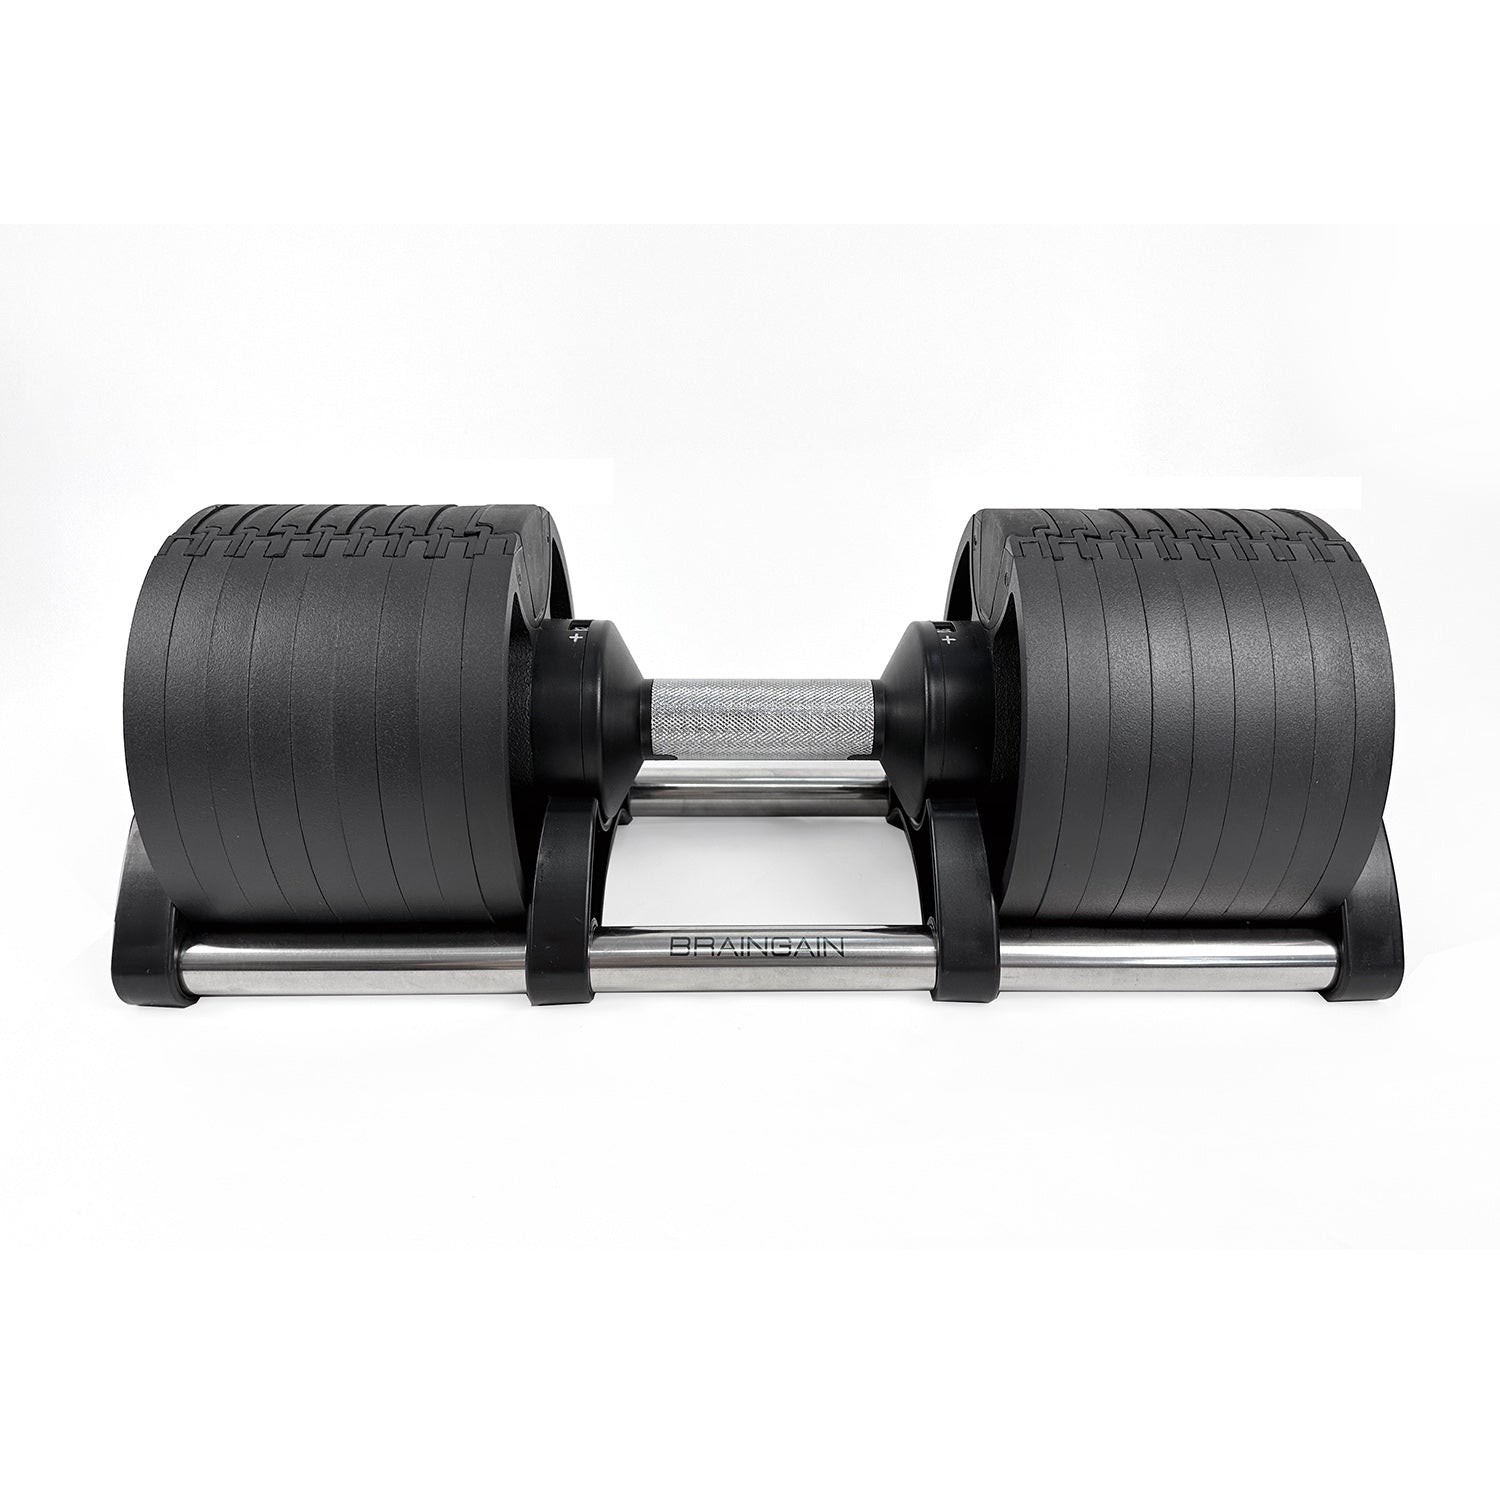 Guess how much they are - dont google it. 2kg #louisvuitton #dumbbells